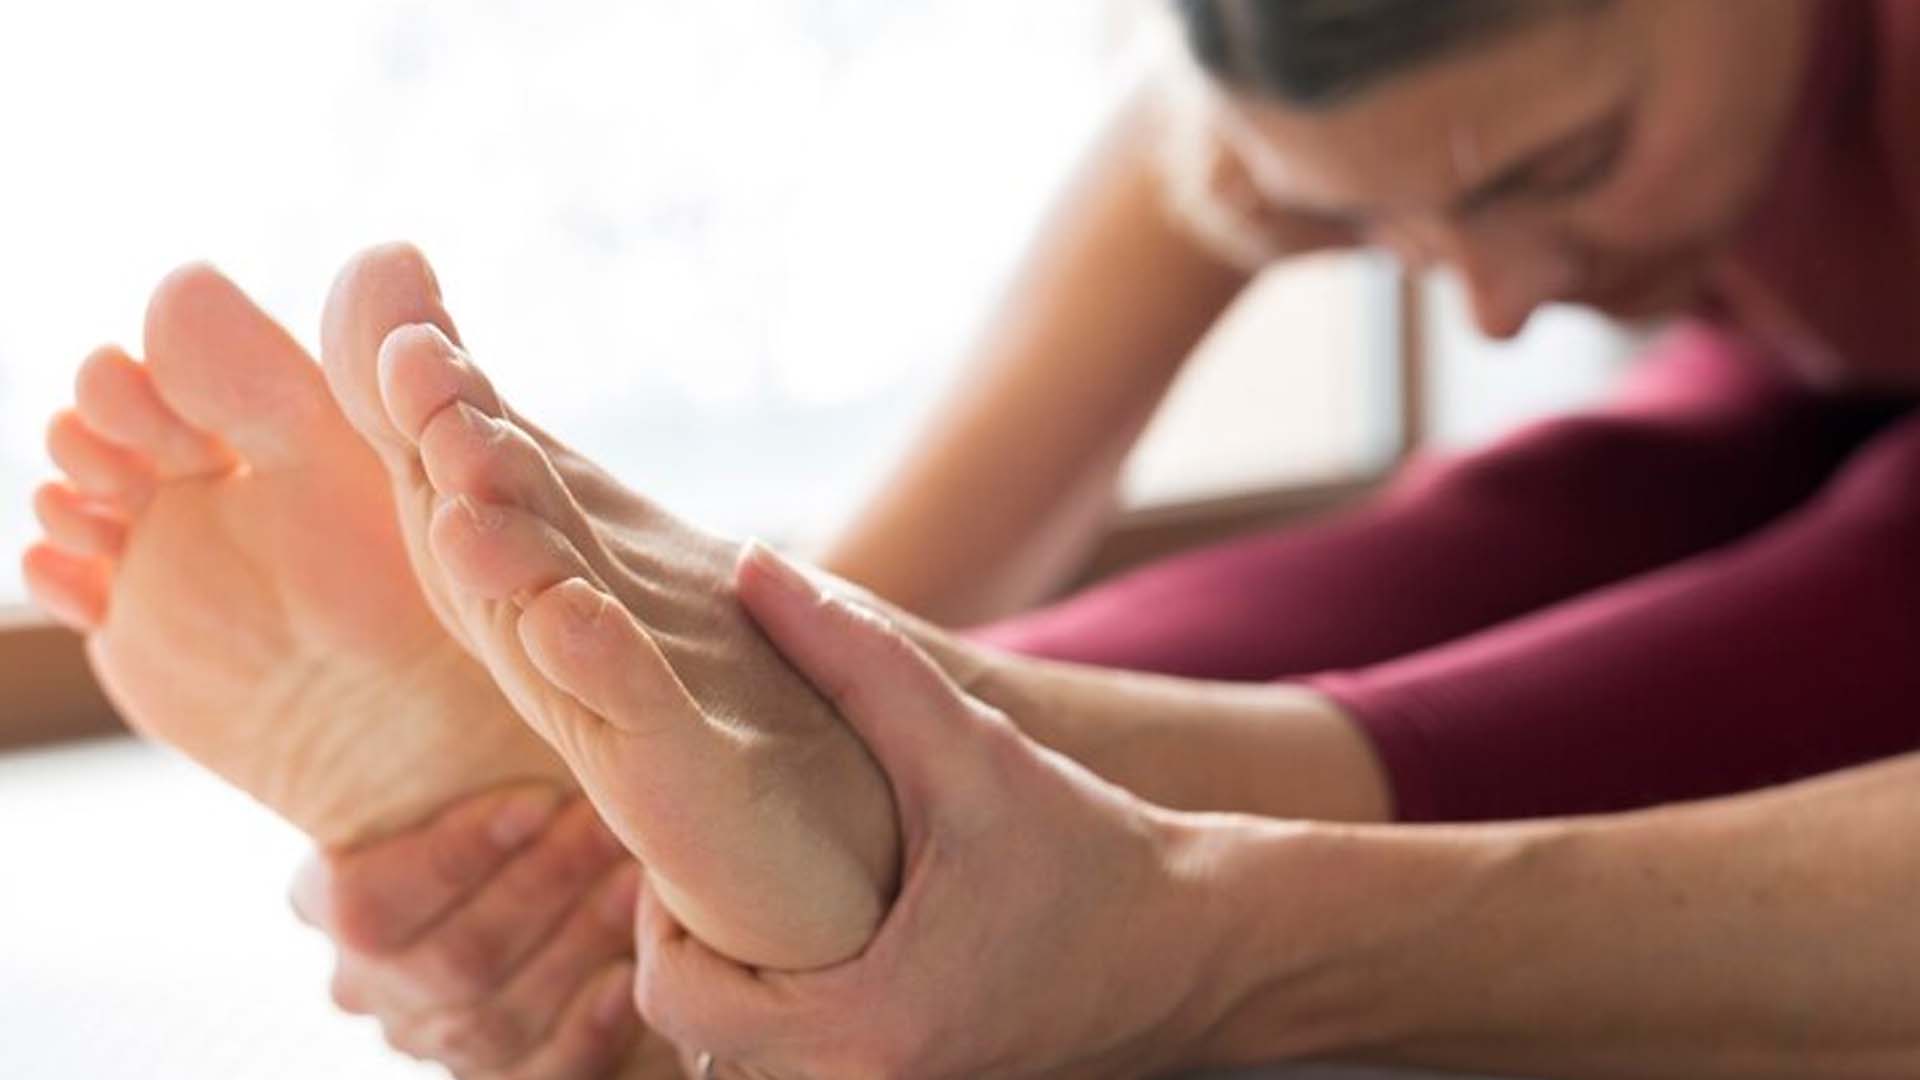 What are the Home Remedies for Plantar Fasciitis?